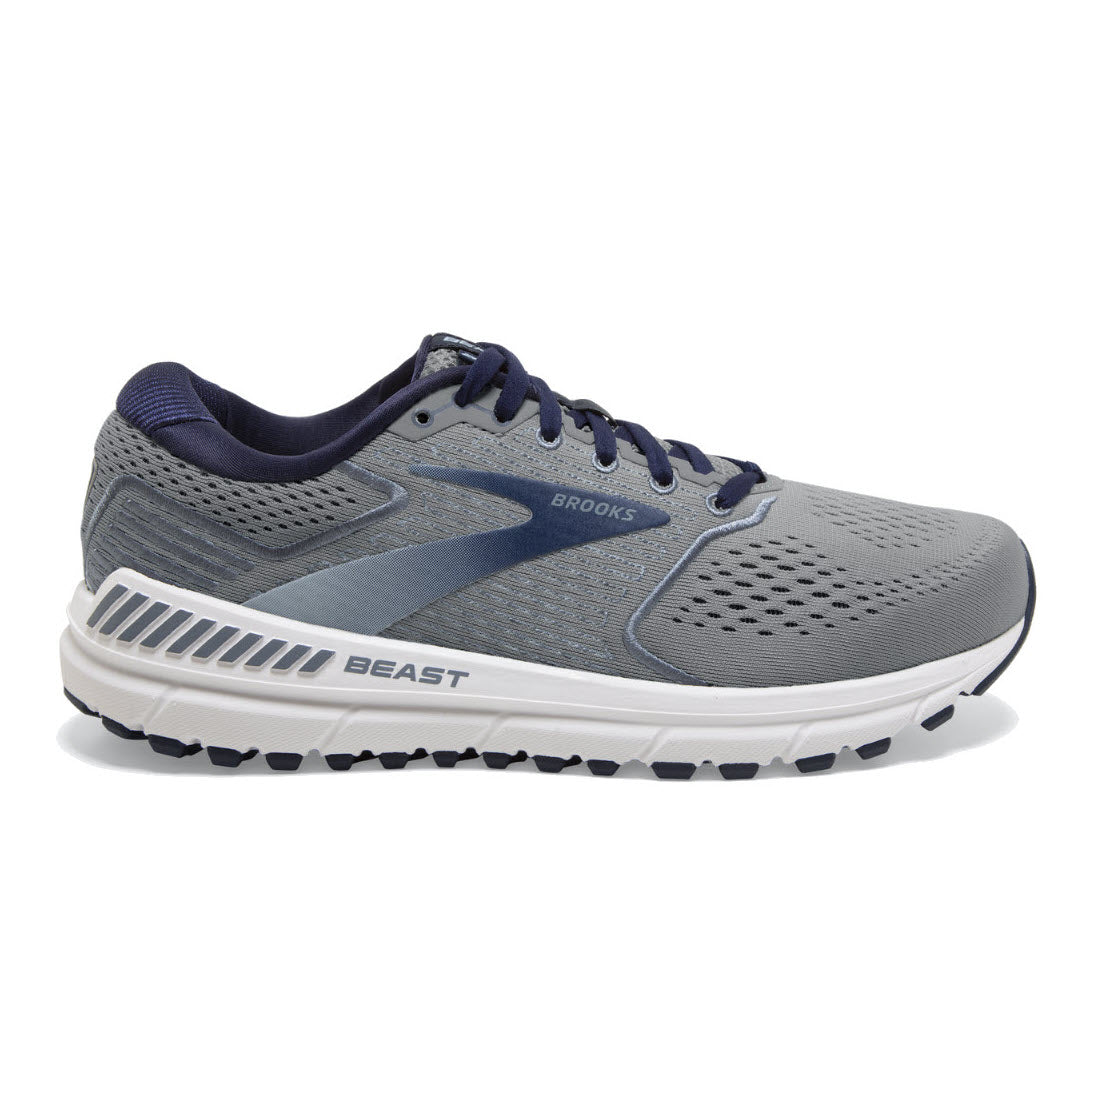 A BROOKS BEAST 20 BLUE/GREY - MENS men&#39;s running shoe, featuring a breathable mesh upper and BioMoGo DNA midsole.